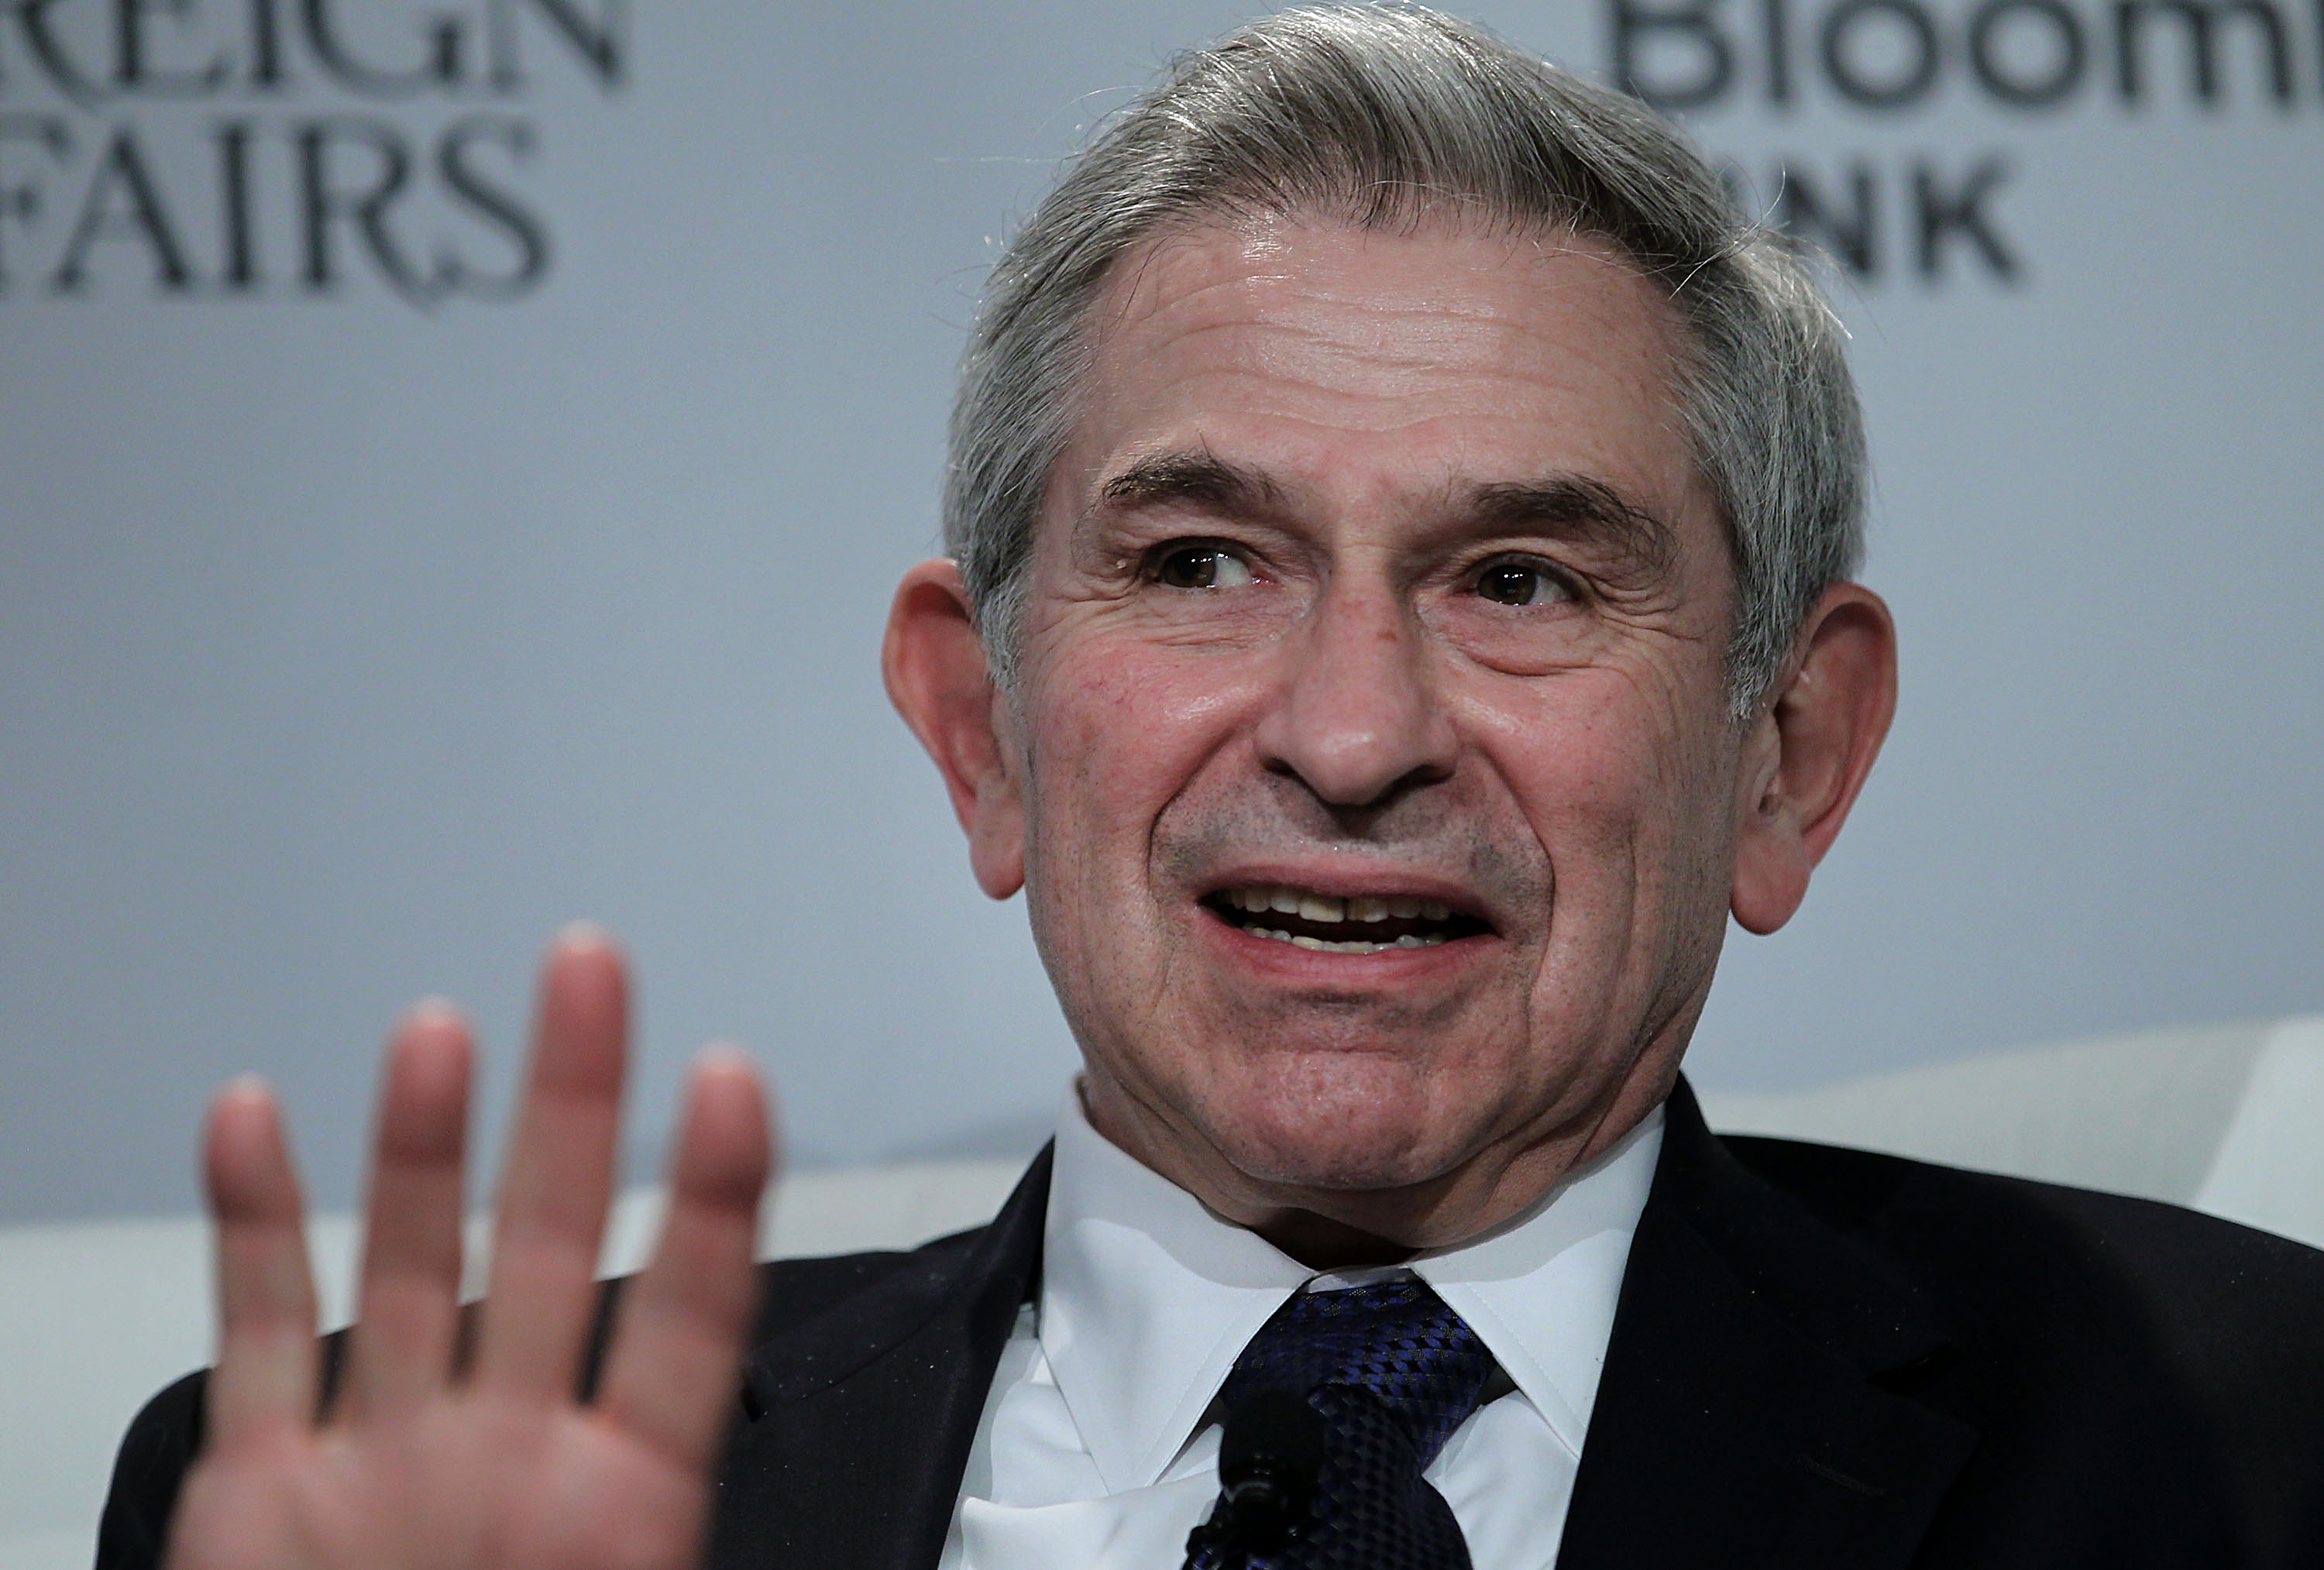 Paul Wolfowitz, scholar at American Enterprise Institute for Public Policy Research (AEI) and former president of World Bank Group, speaks at the Bloomberg global markets summit in New York, U.S., on Thursday, Jan 17, 2013.
